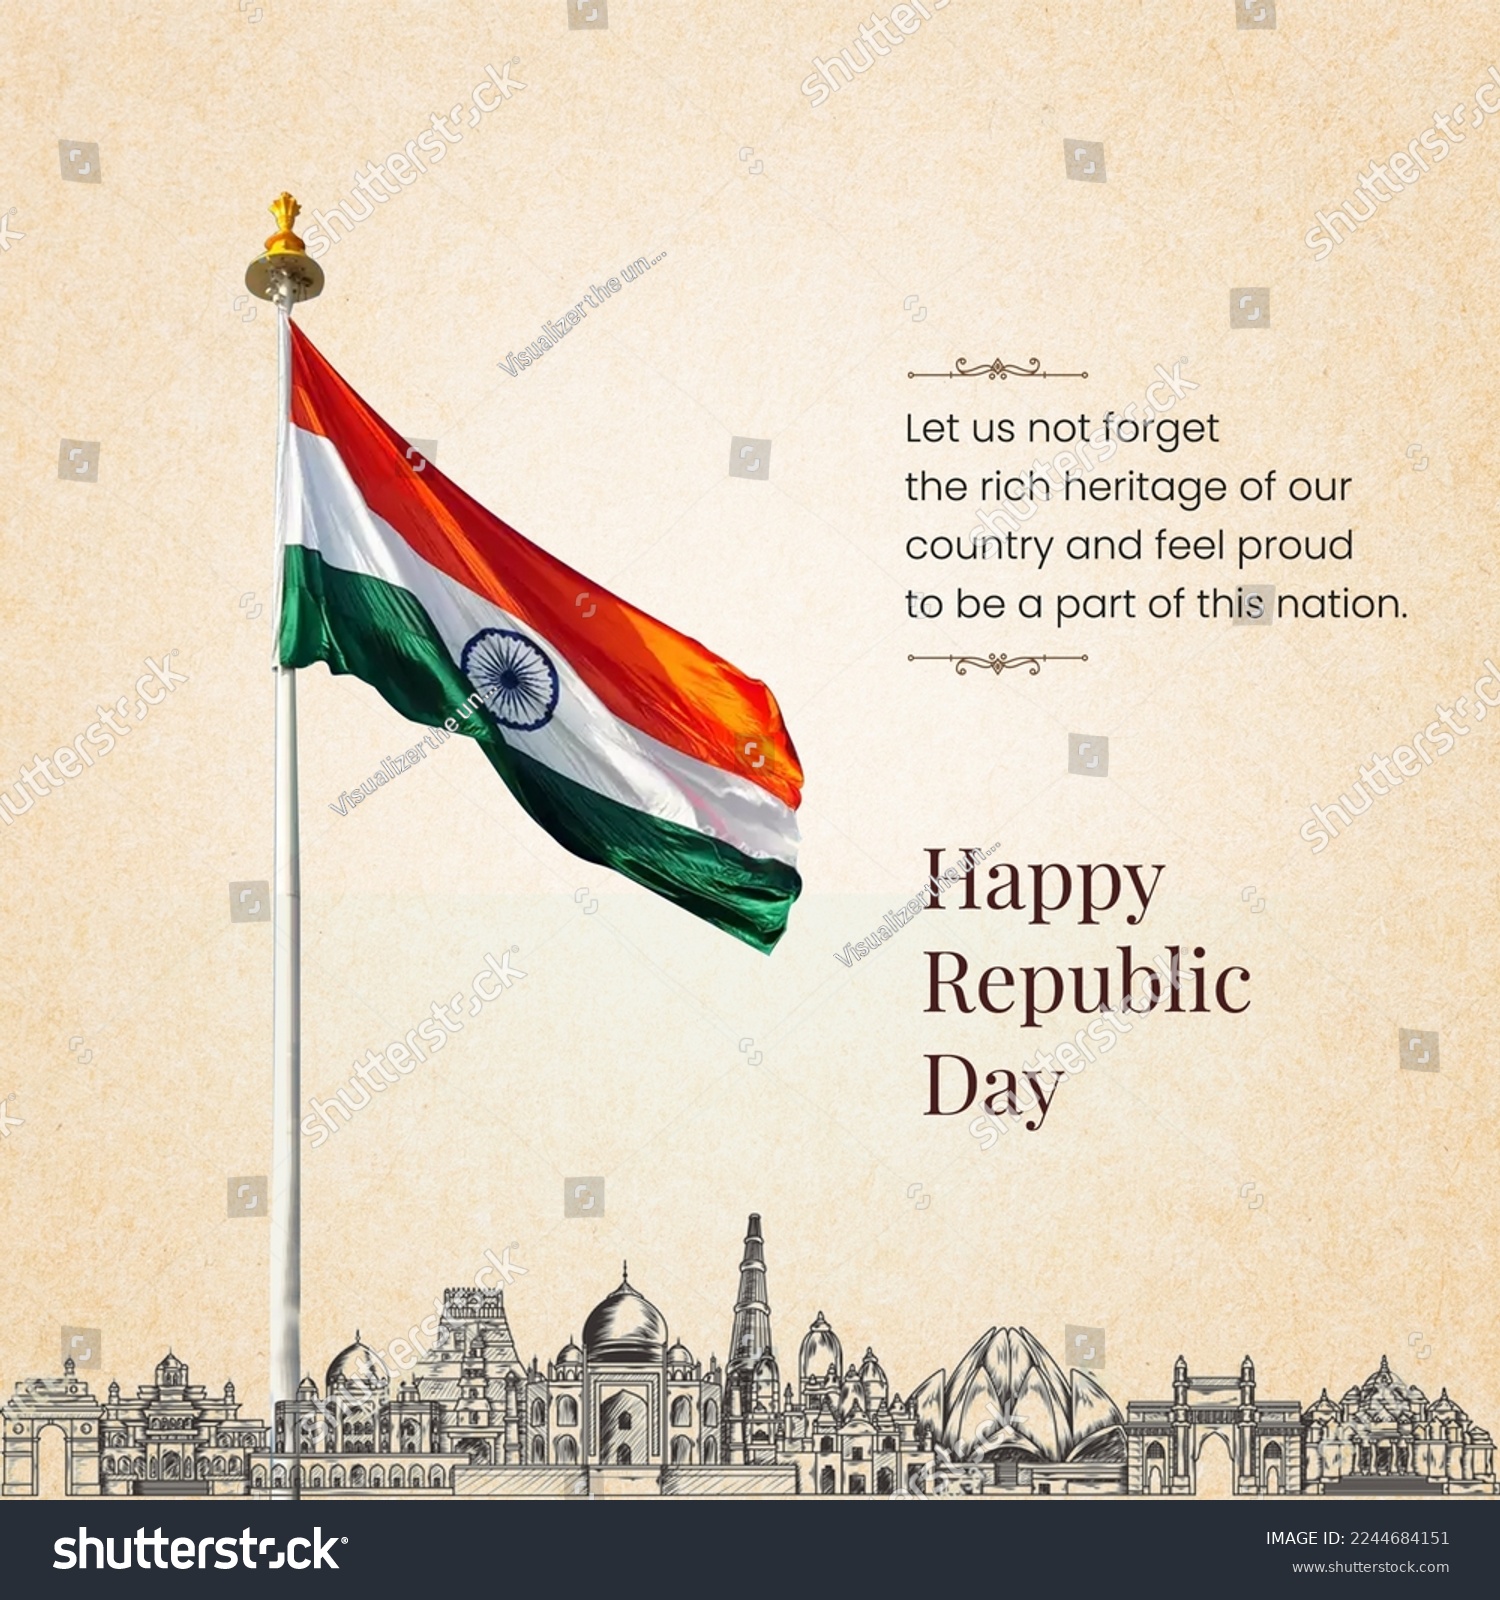 Happy Republic and Independence Day of India #2244684151